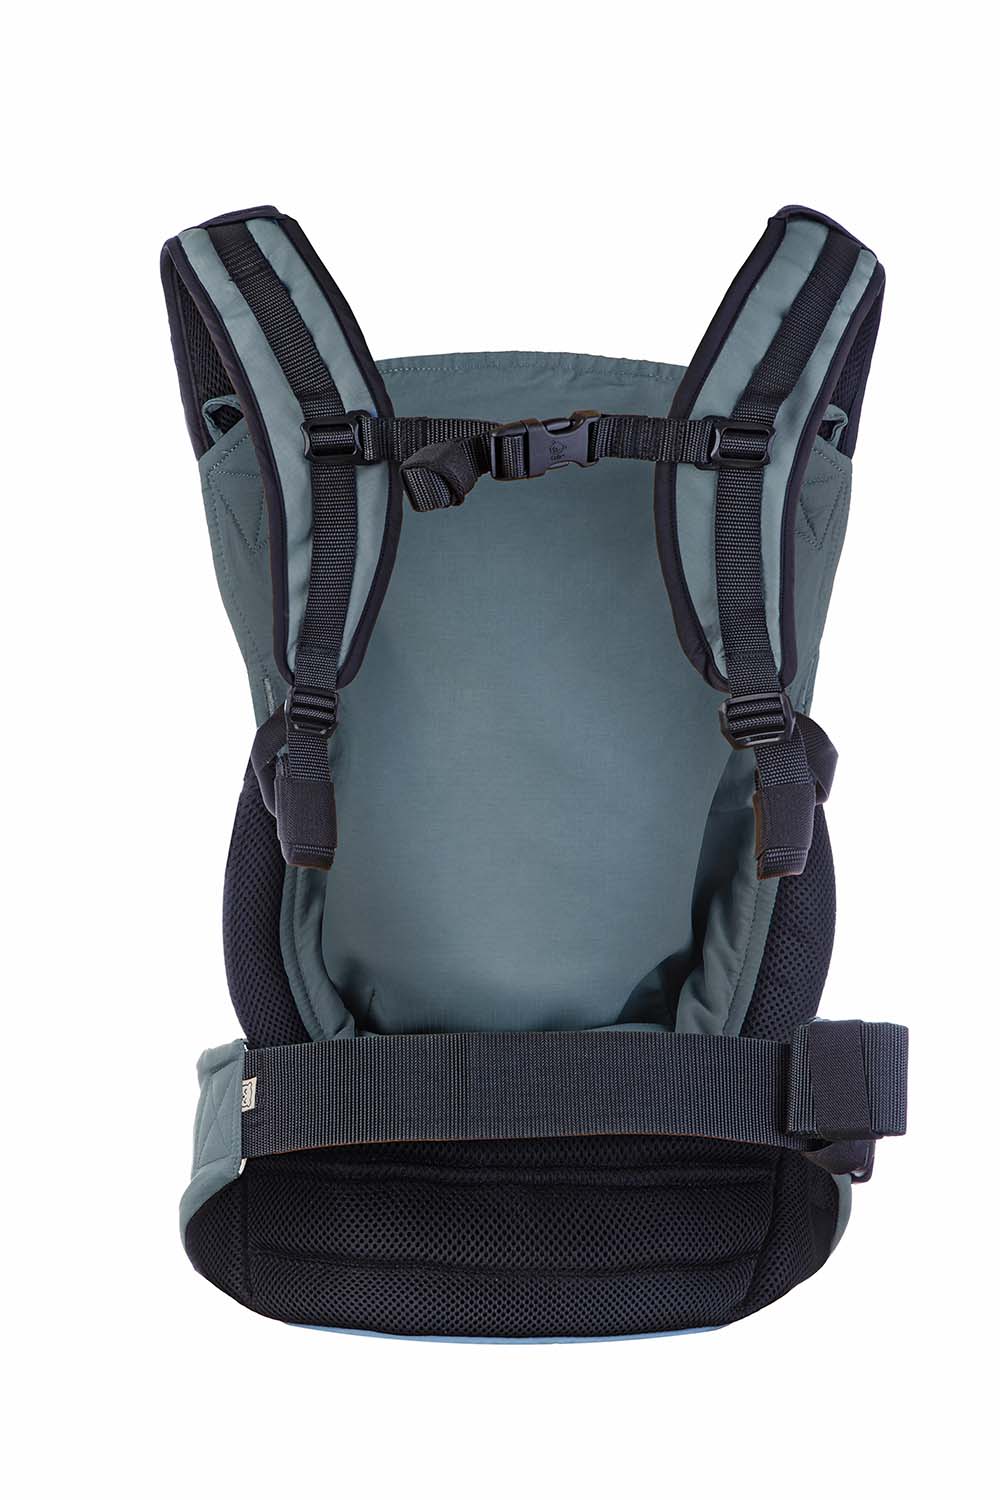 Infant Carrier Insert for Carrying Newborns and Infants - Tula – Baby Tula  US